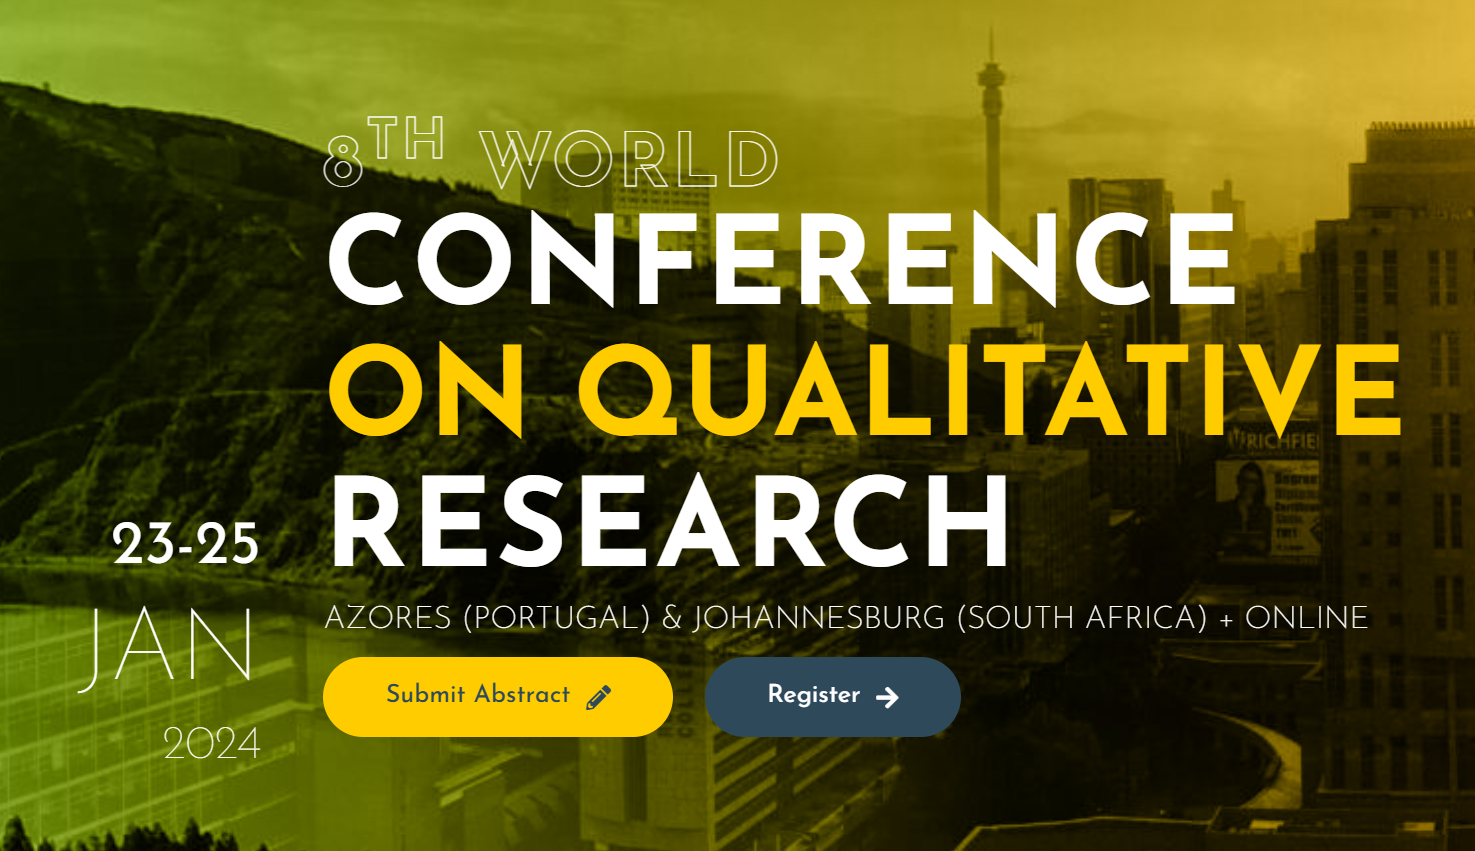 8TH WORLD CONFERENCE ON QUALITATIVE RESEARCH